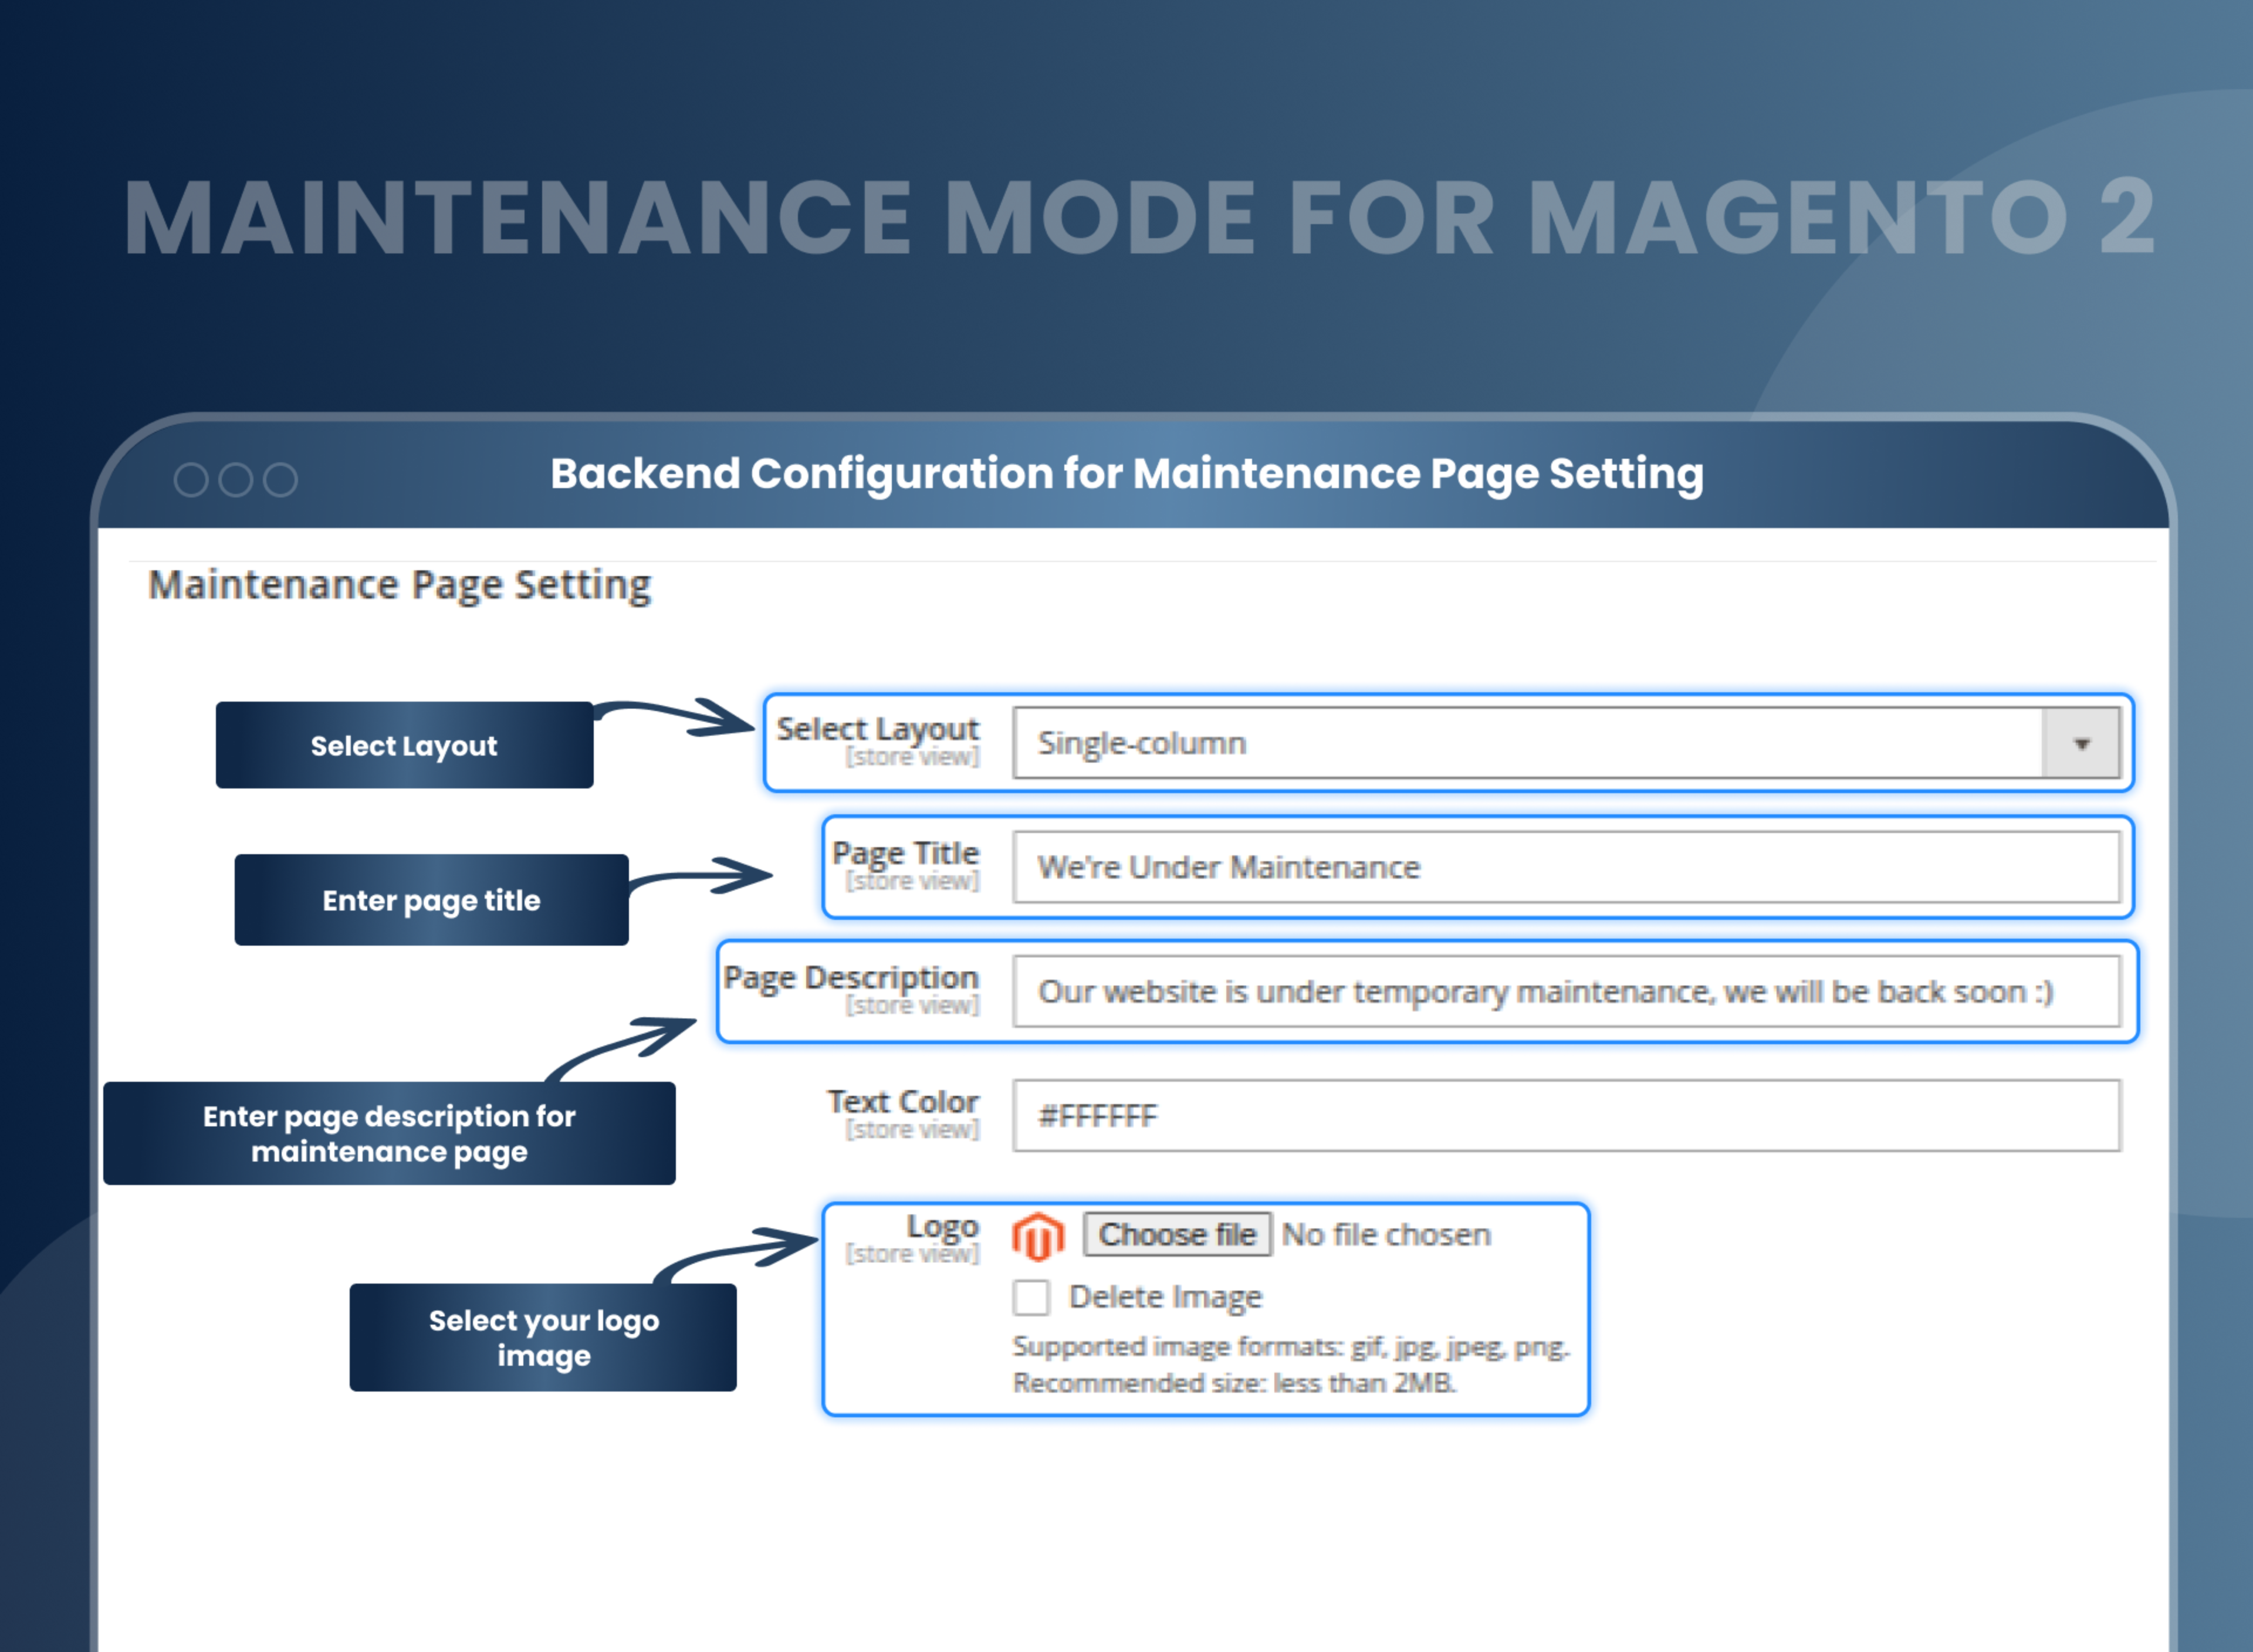 Backend Configuration for Maintenance Page Setting